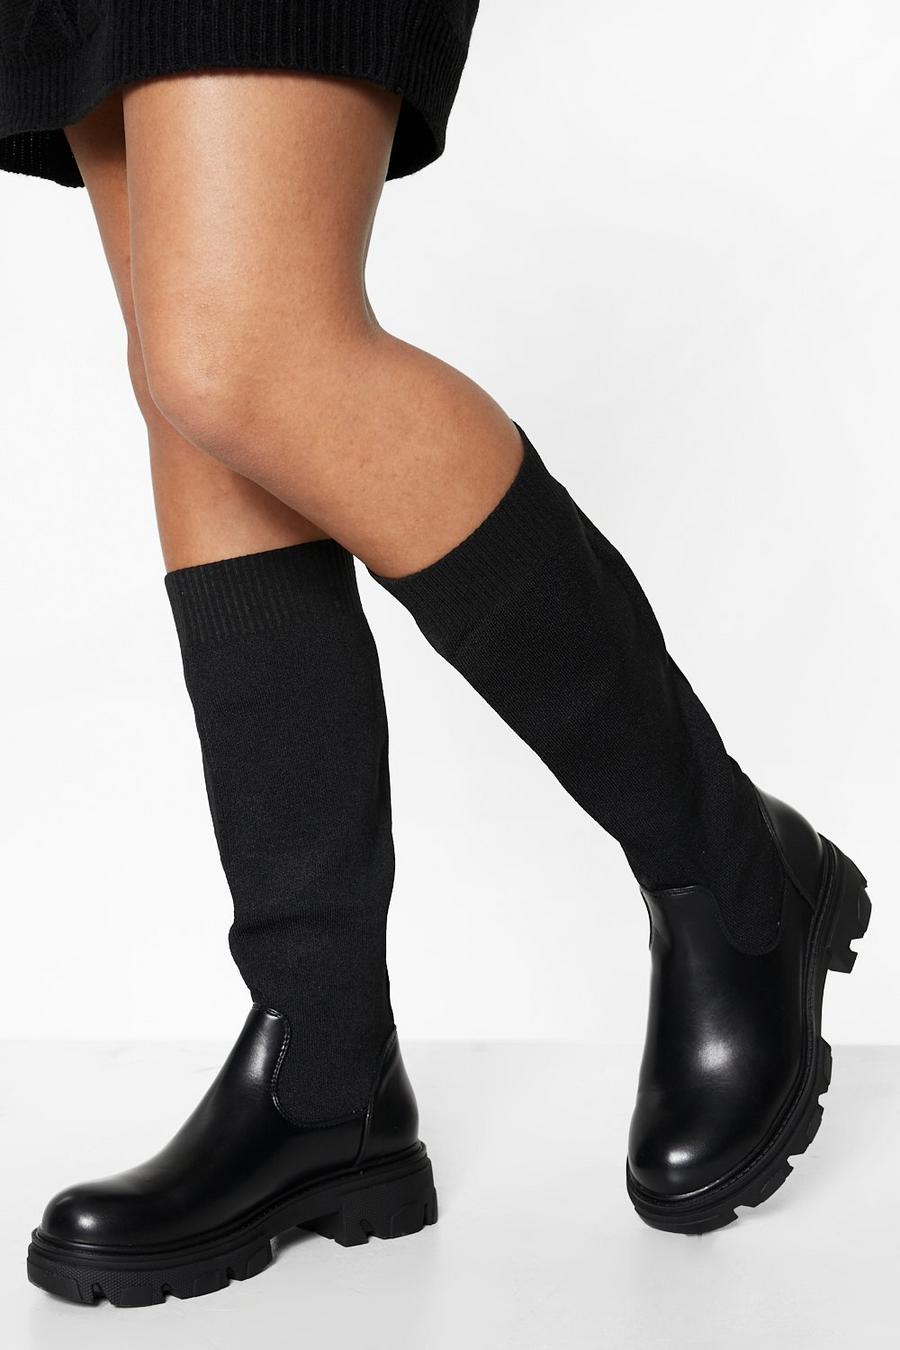 Black Knitted Upper Knee High Boots